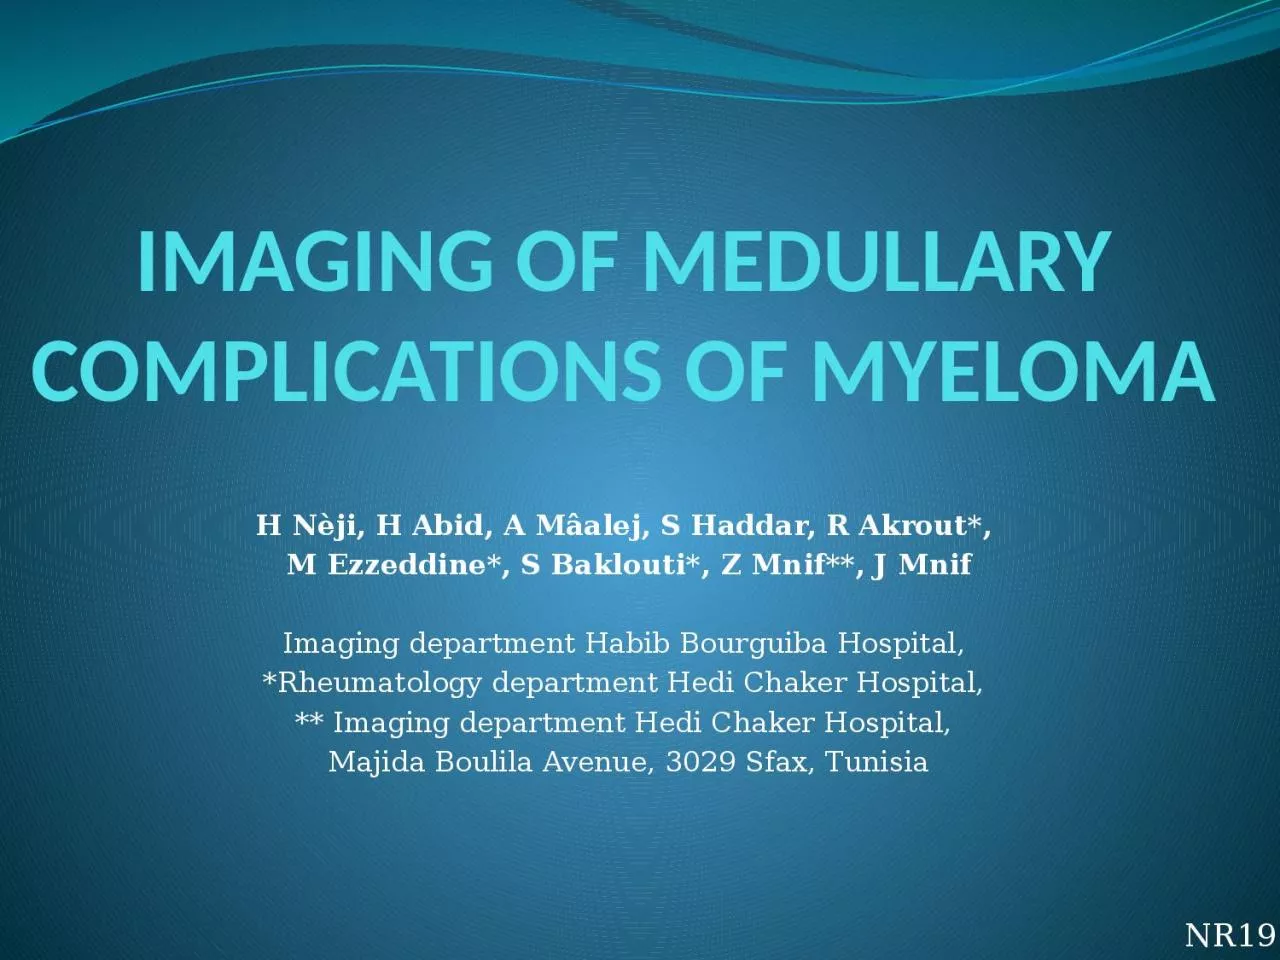 IMAGING OF MEDULLARY COMPLICATIONS OF MYELOMA